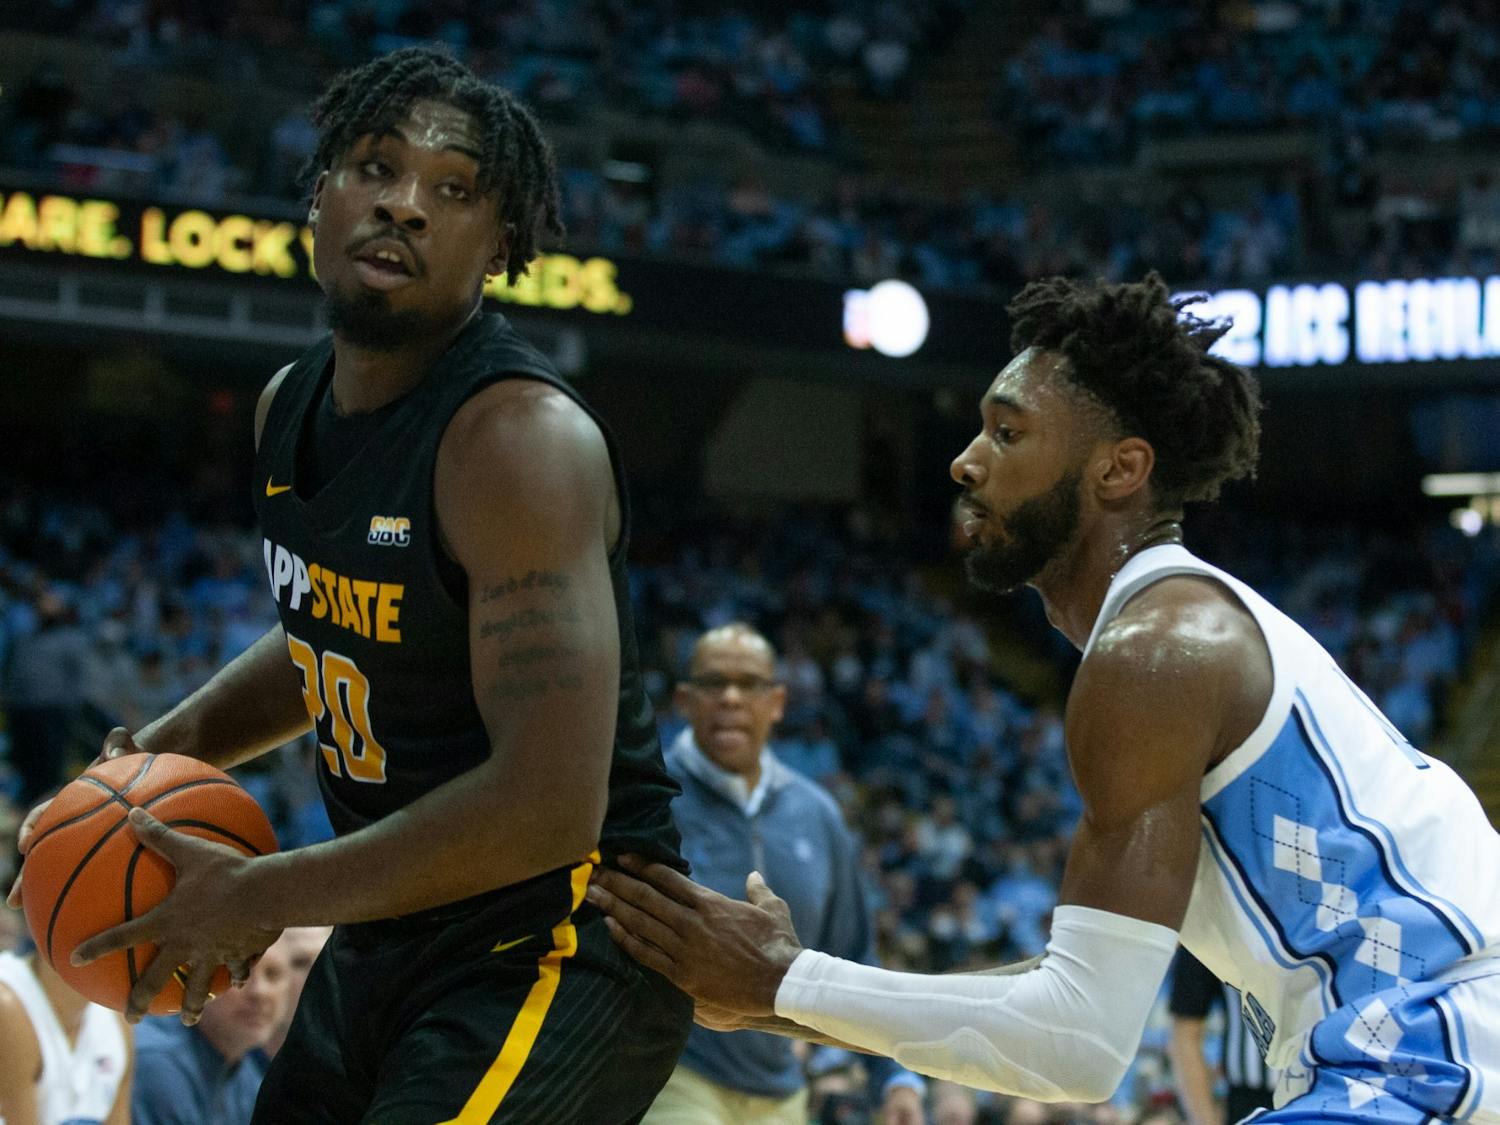 Senior forward Leaky Black (1) guards an Appalachian State player at the game on Dec 21, 2021 at the Dean E. Smith Center. UNC won 70-50.